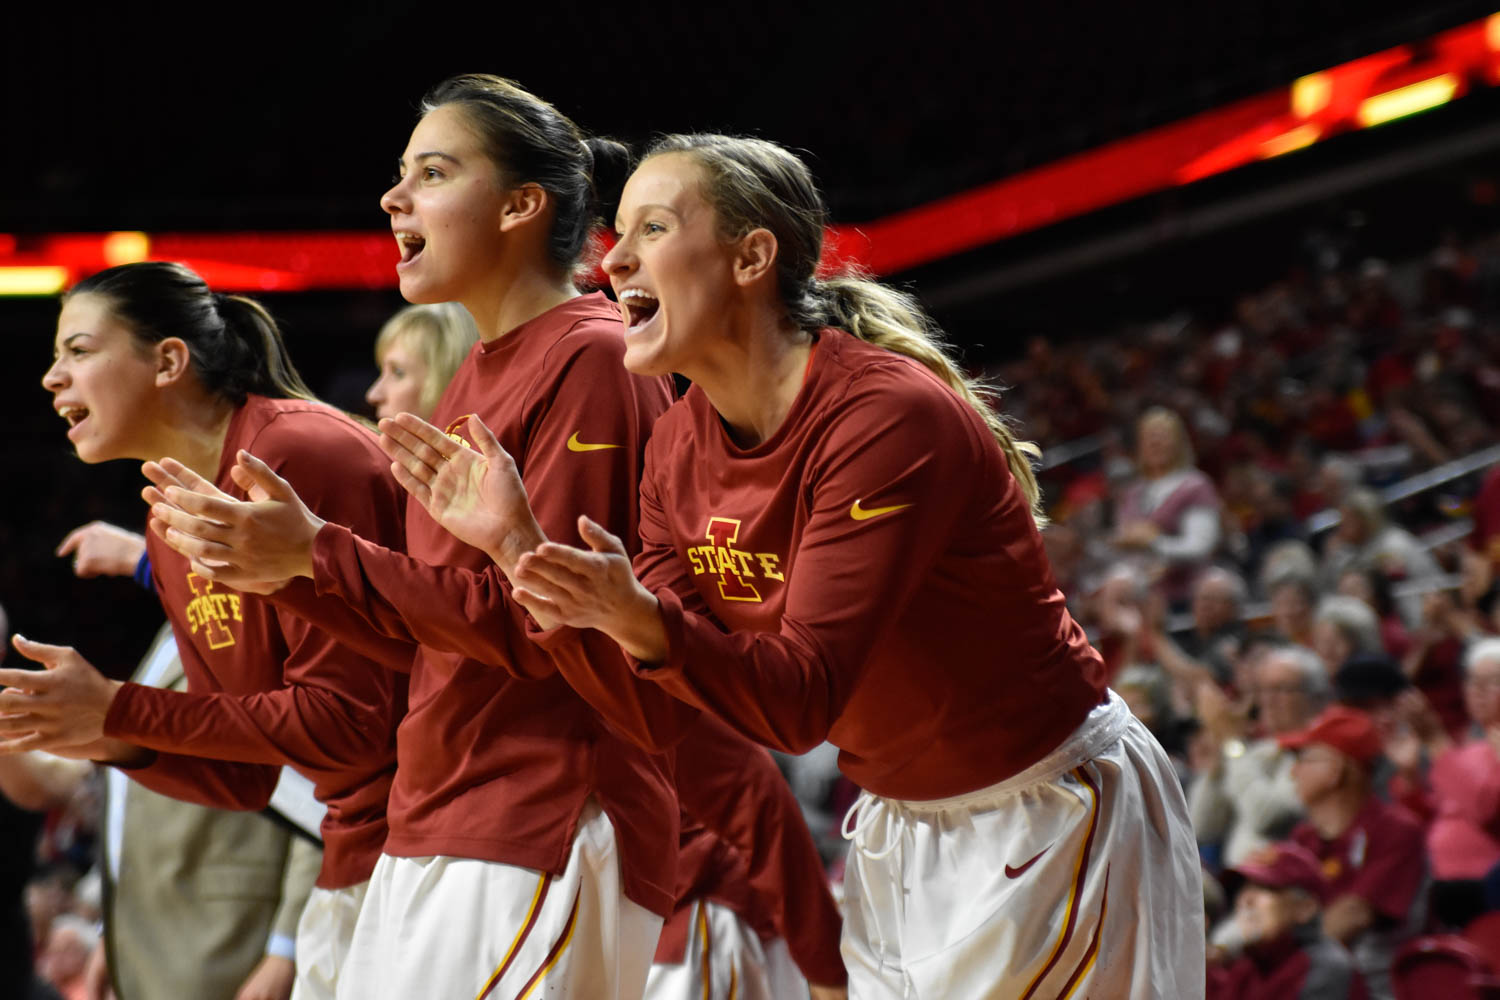 Senior guard Lexi Albrecht cheers for the Cyclones at the basketball game against UNI at Hilton Coliseum on Nov. 15. ISU won 76-68. Credit: Lani Tons